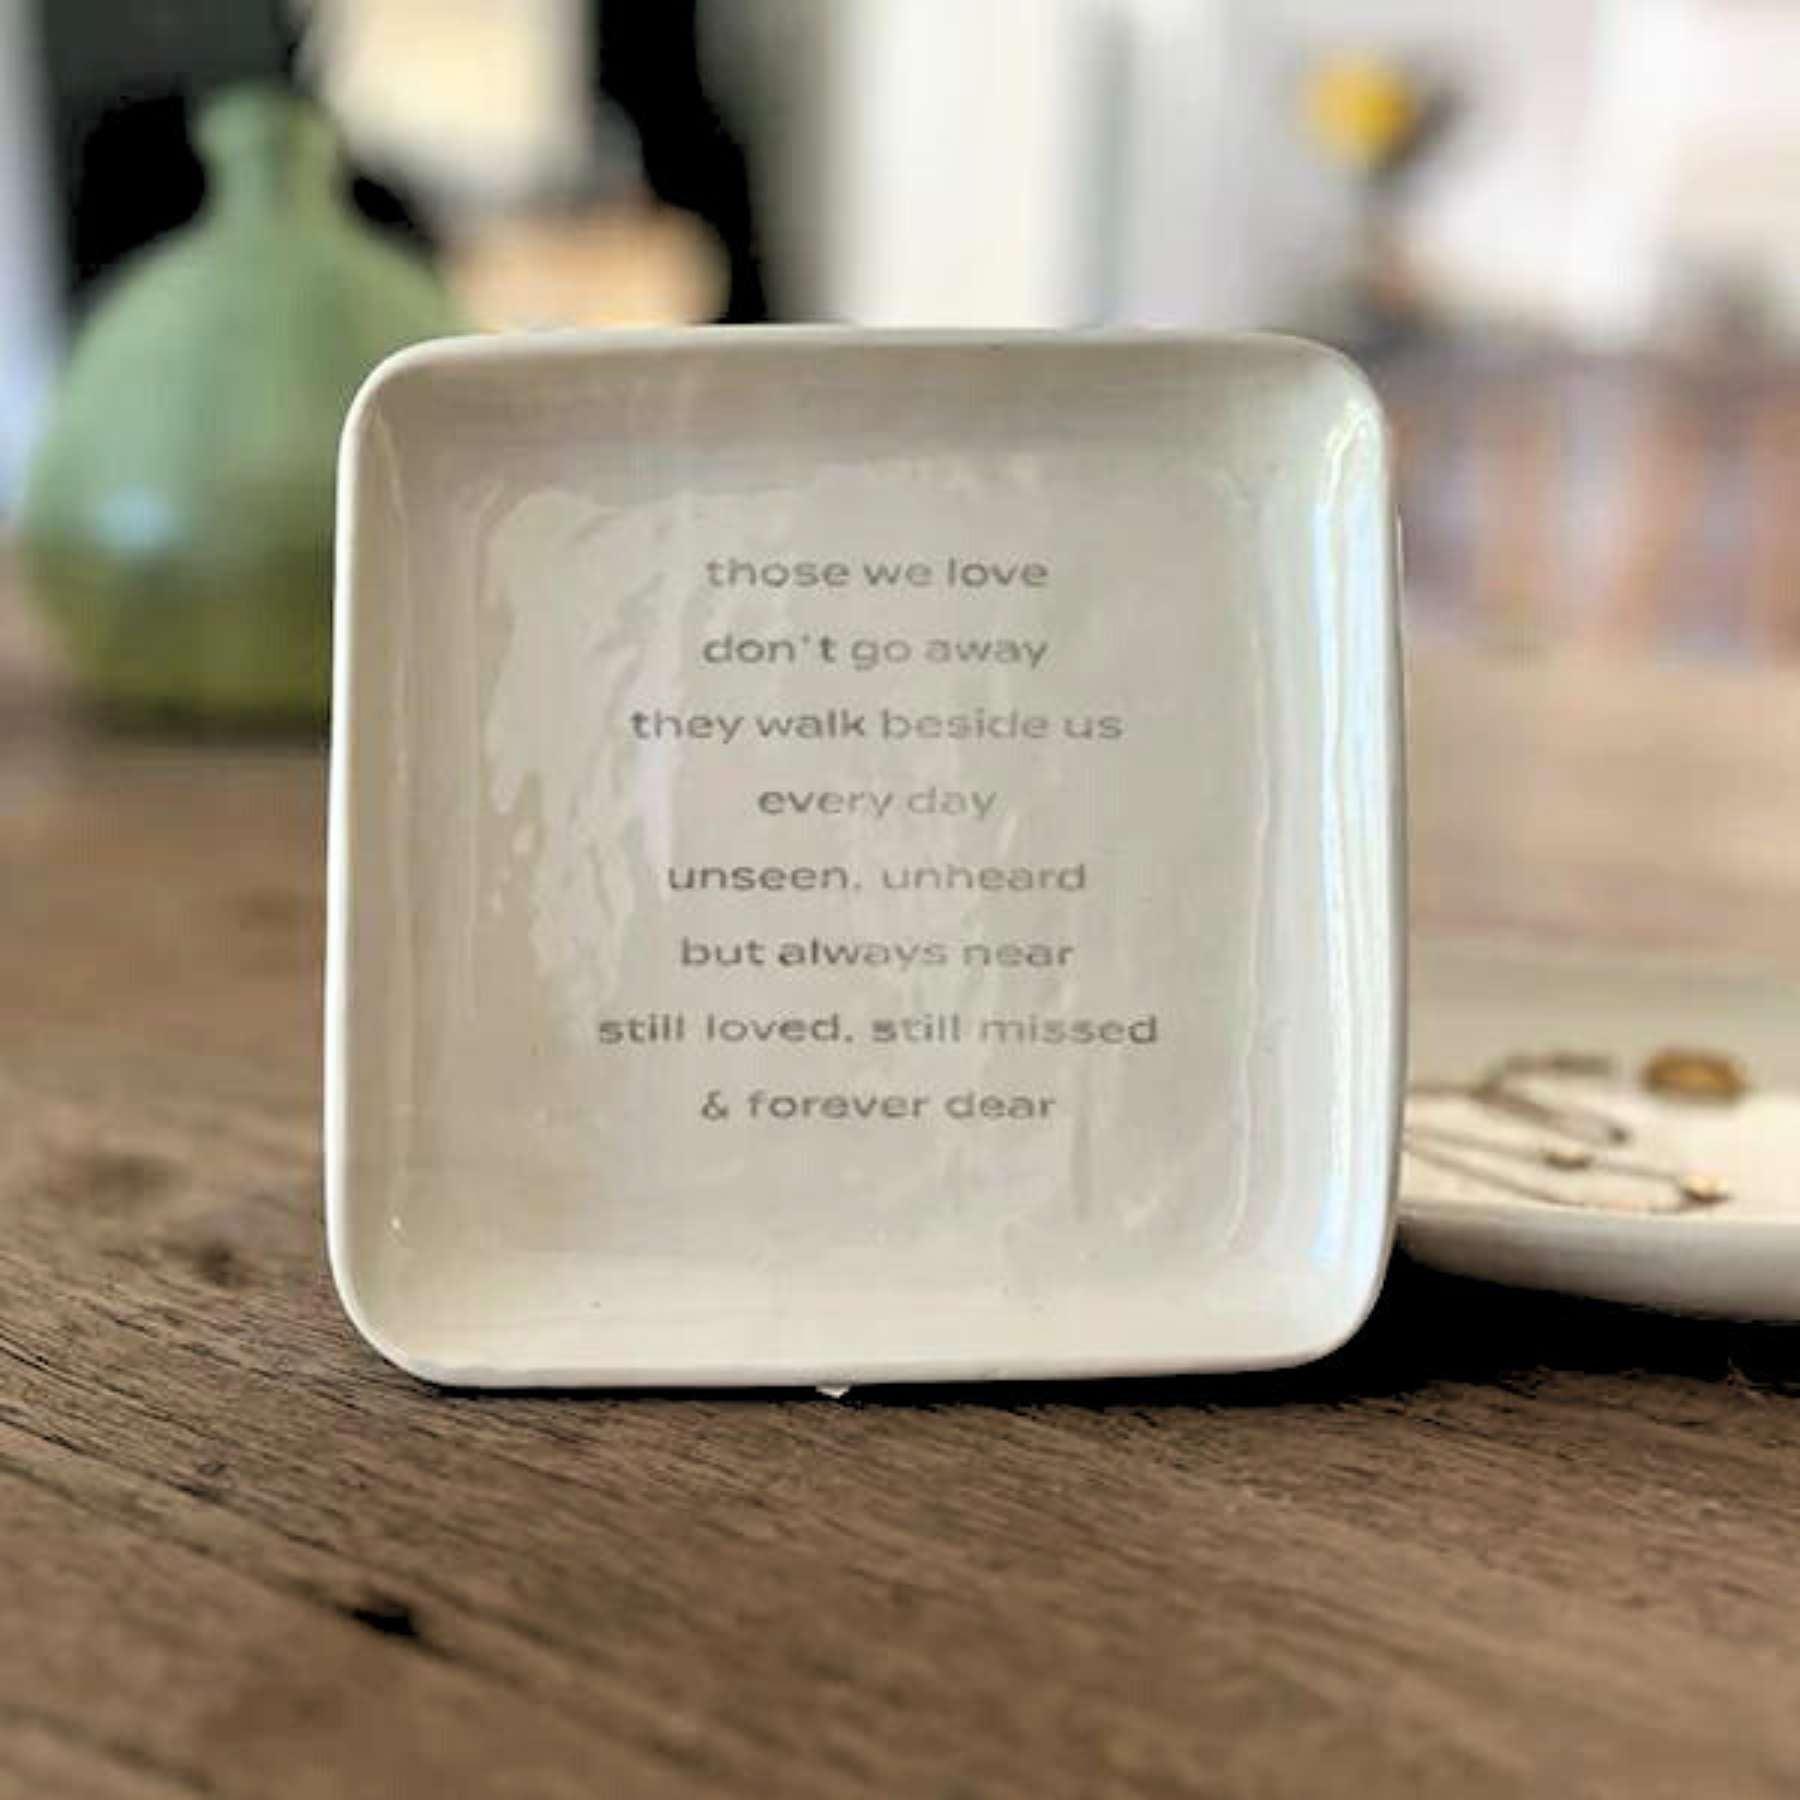 Square memorial keepsake dish with comforting quote for bereavement, Fabulous Flowers and Gifts TULUA Ceramics Collection.